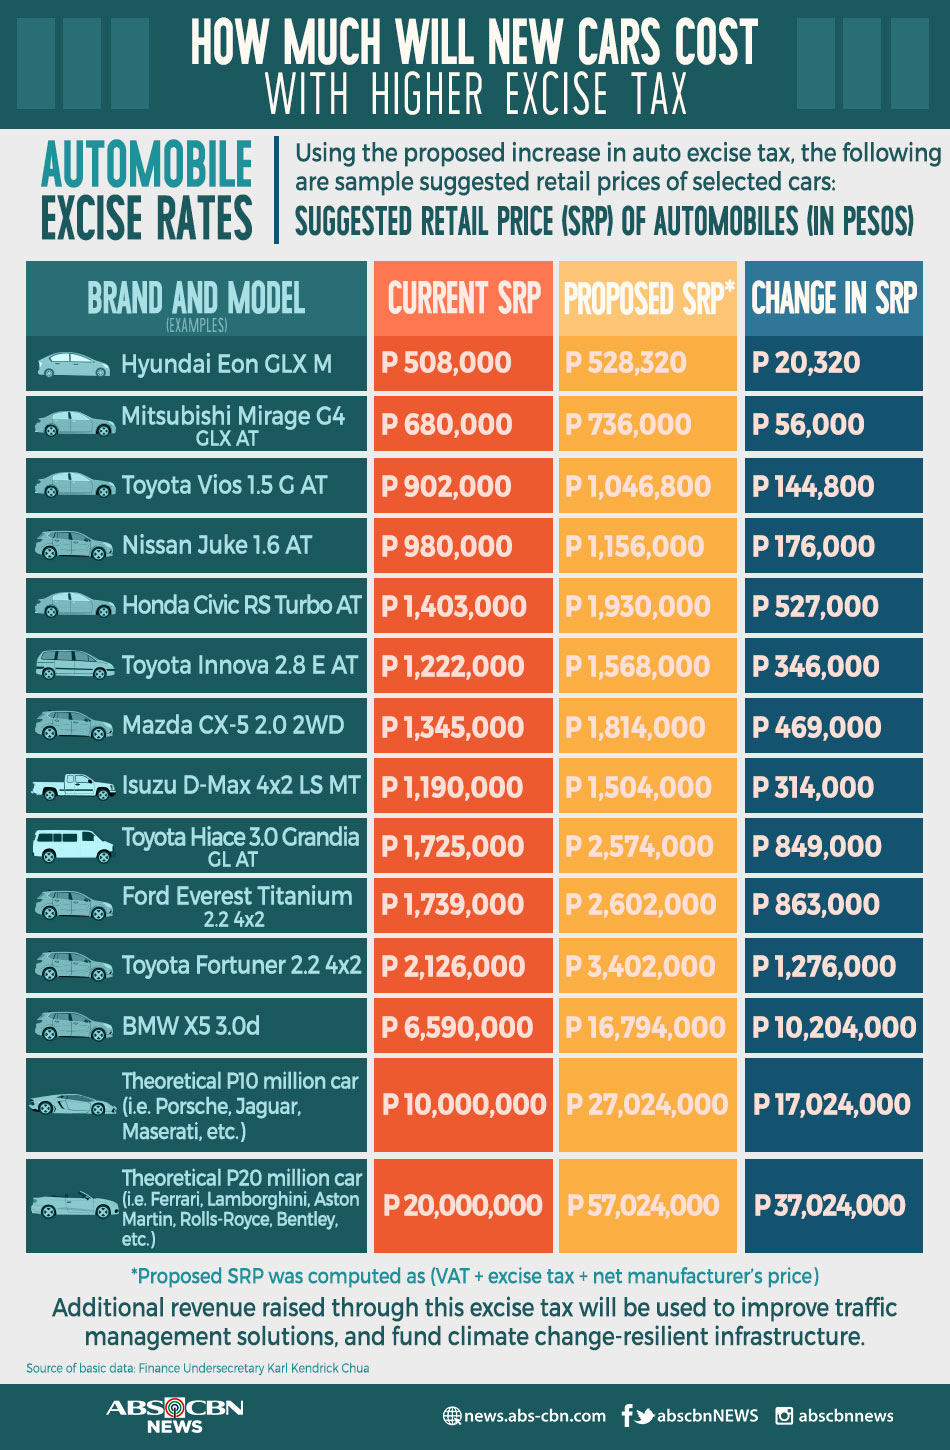 Planning to buy a new car? ABSCBN News